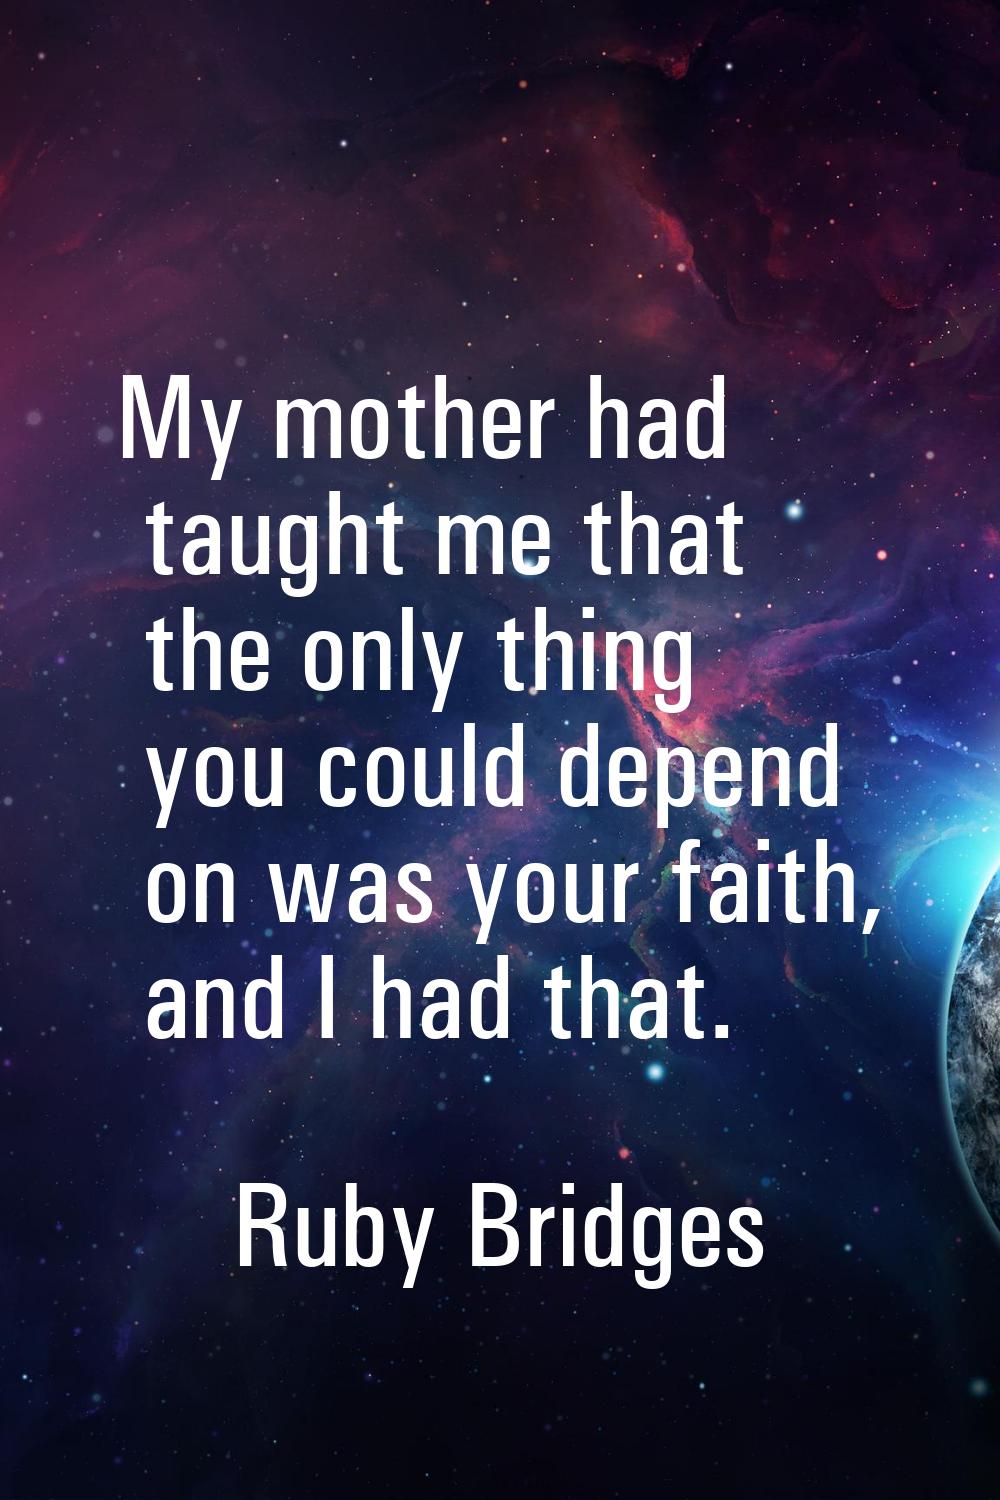 My mother had taught me that the only thing you could depend on was your faith, and I had that.